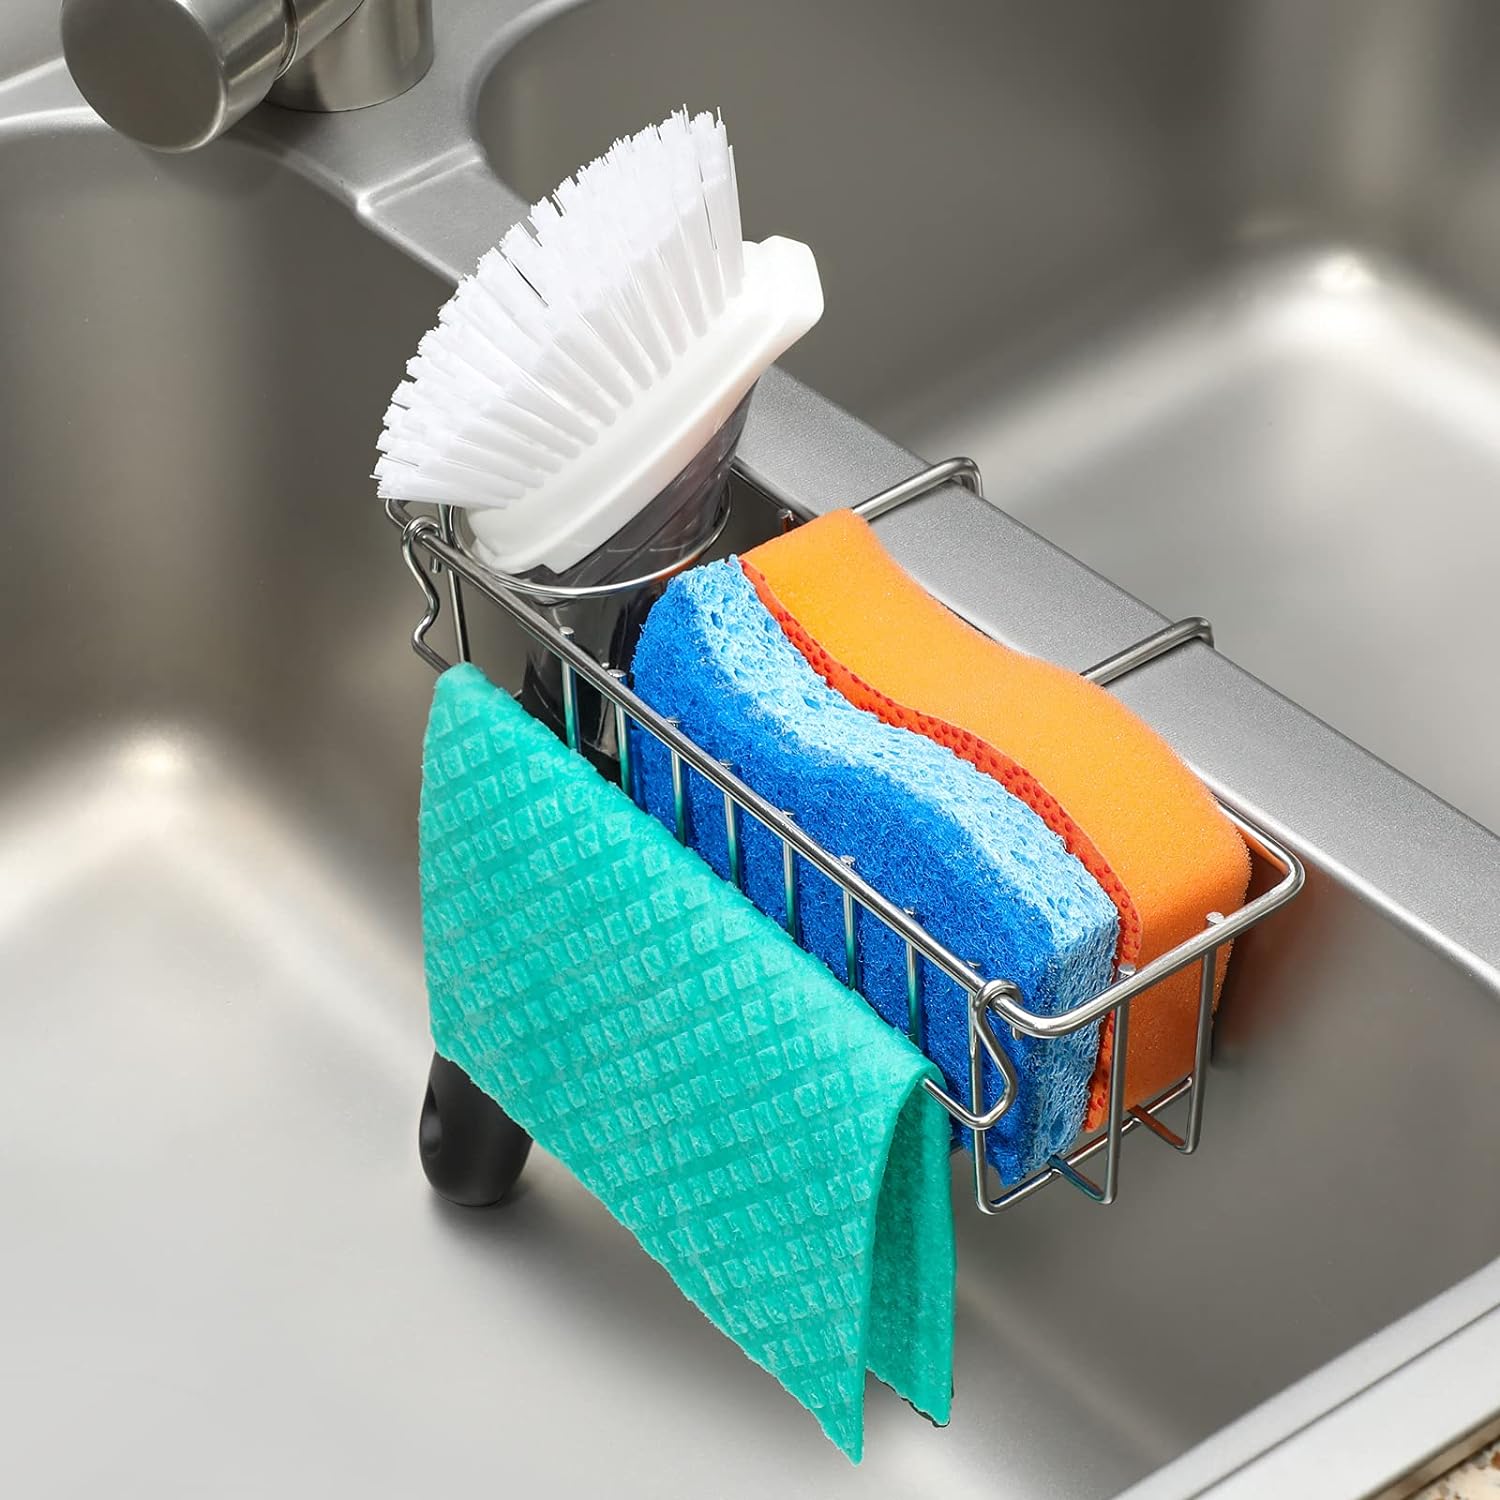 3-in-1 Sponge Holder for Kitchen Sink, Movable Brush Holder + Dish Cloth Hanger, Hanging Caddy, Small in Organizer Accessories Rack Basket, 304 Stainless Steel, Never Rust